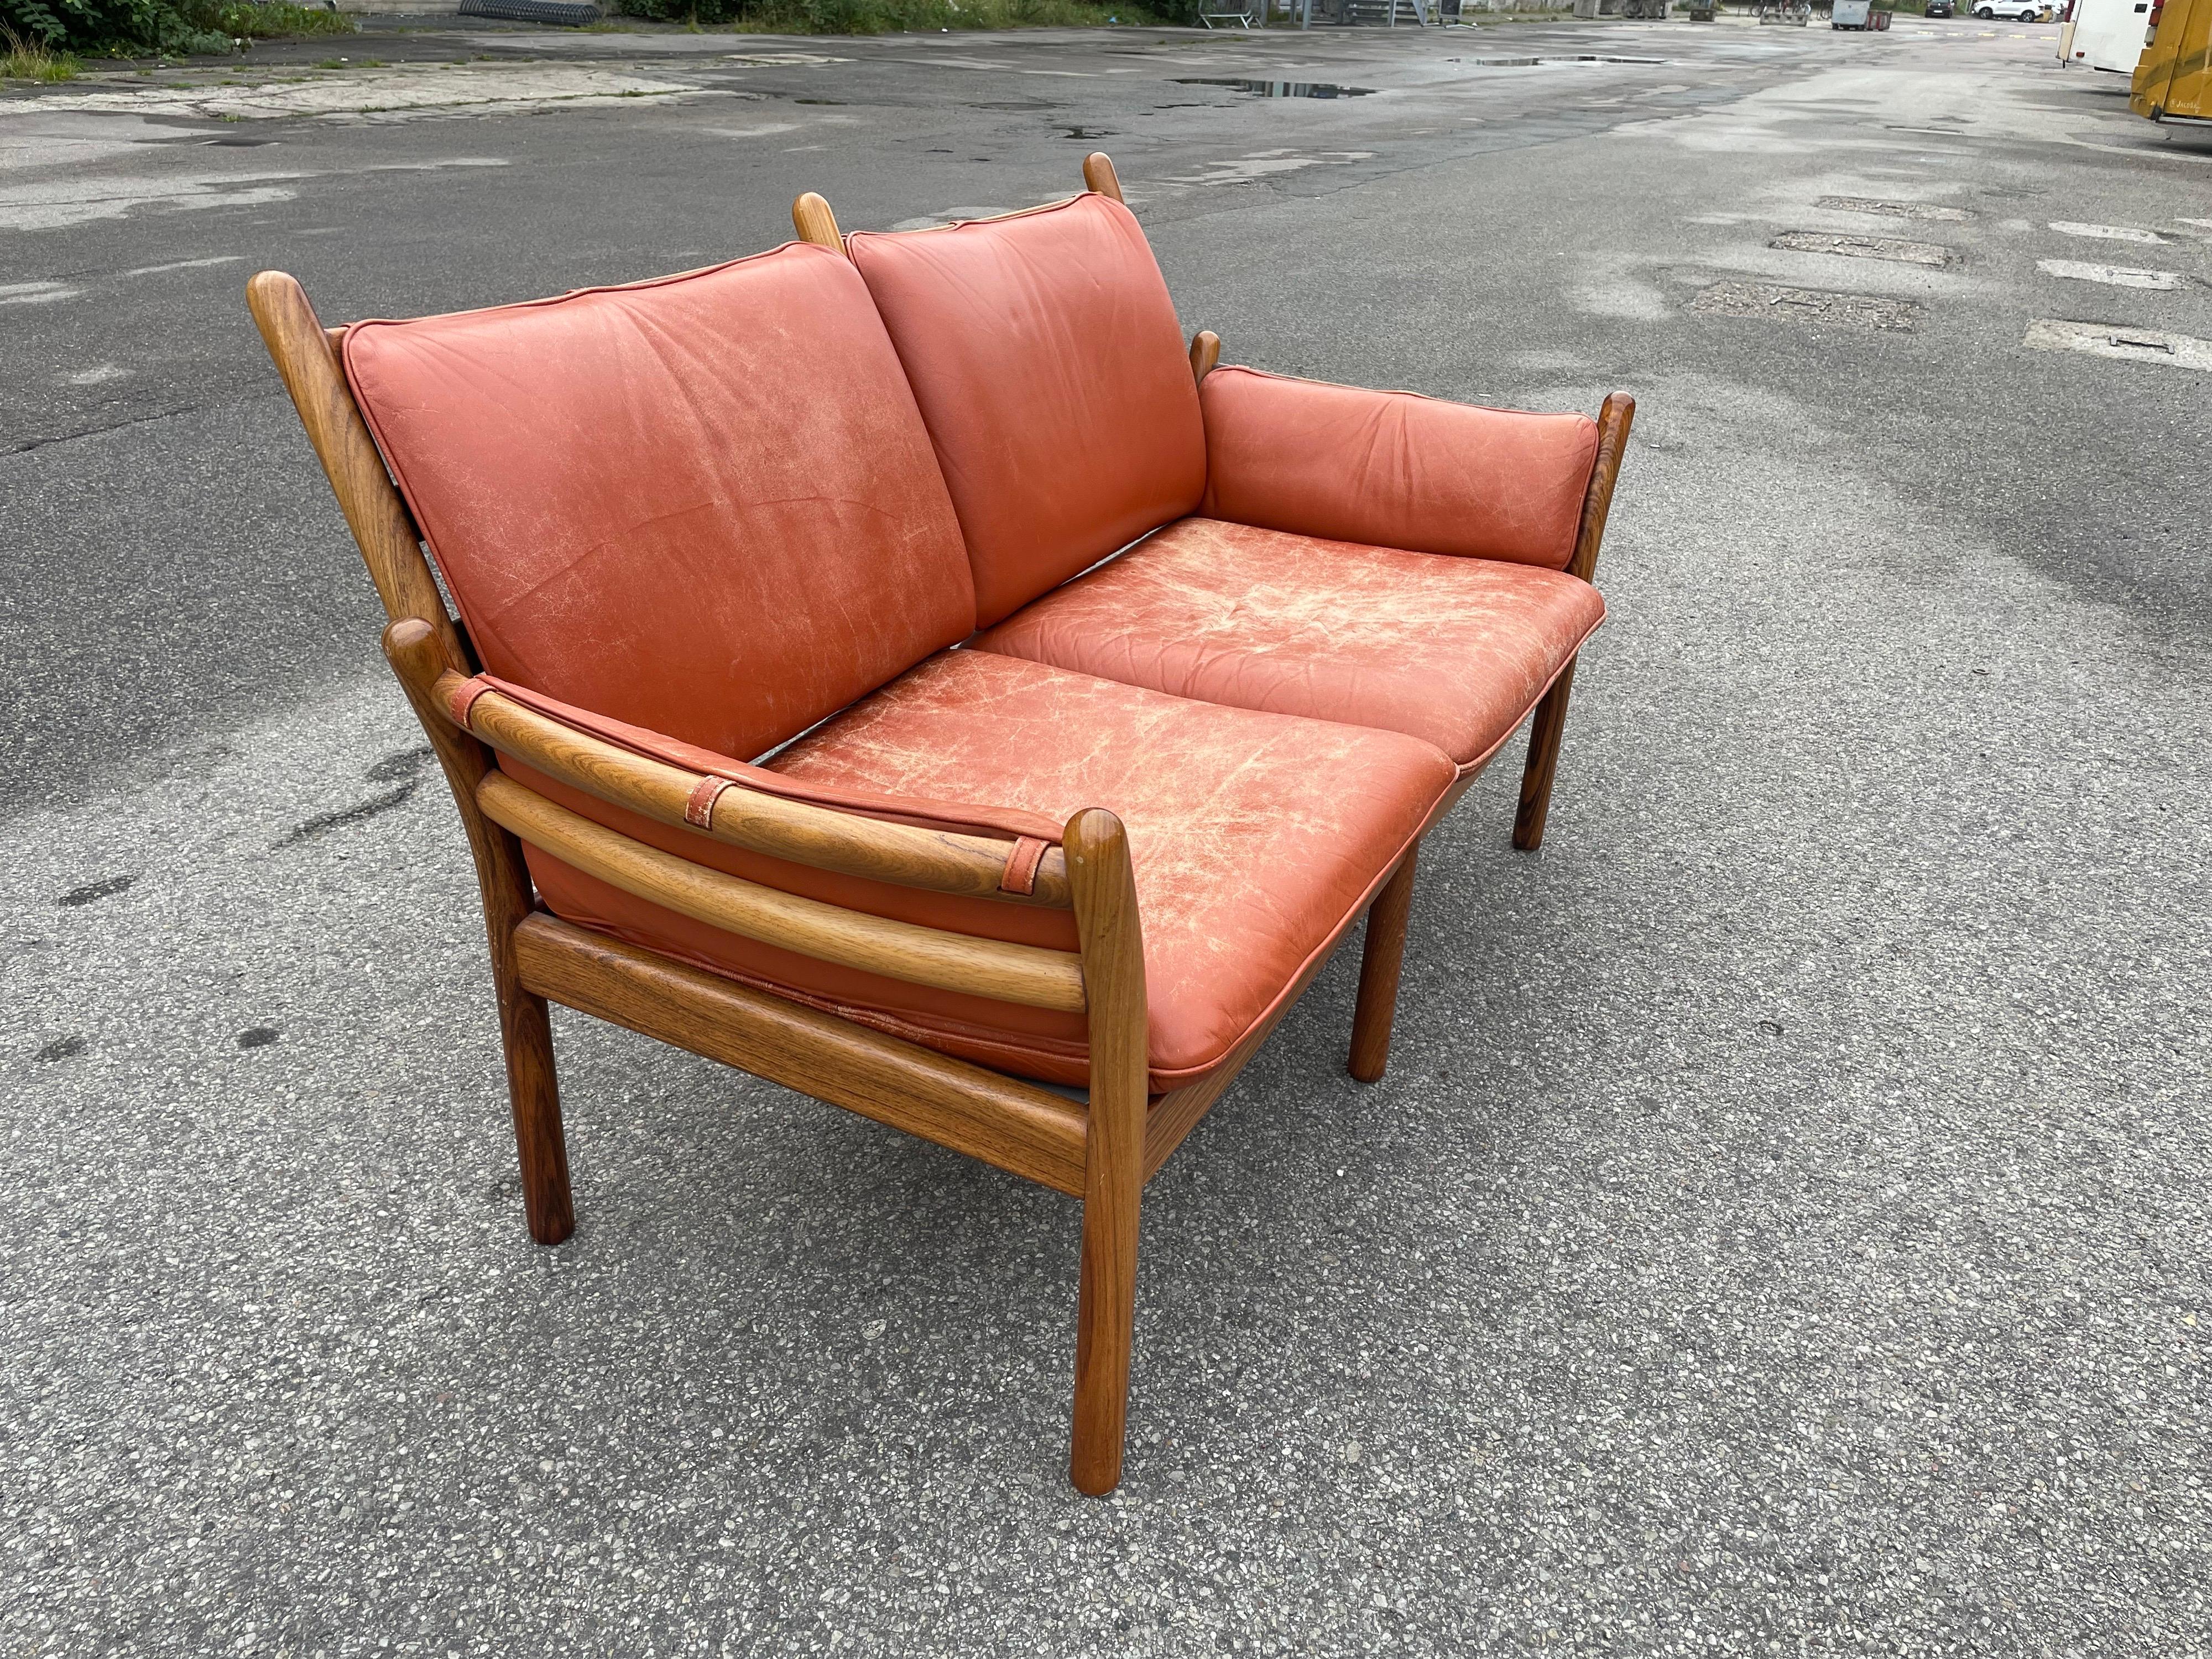 Midcentury Danish rosewood and leather sofa by Illum Wikkelsø for CFC Silkeborg. Beautiful organic design with joinery resembling a tree branch, between the sides and back. An overall attention to the details, that make this two-seat an incredible